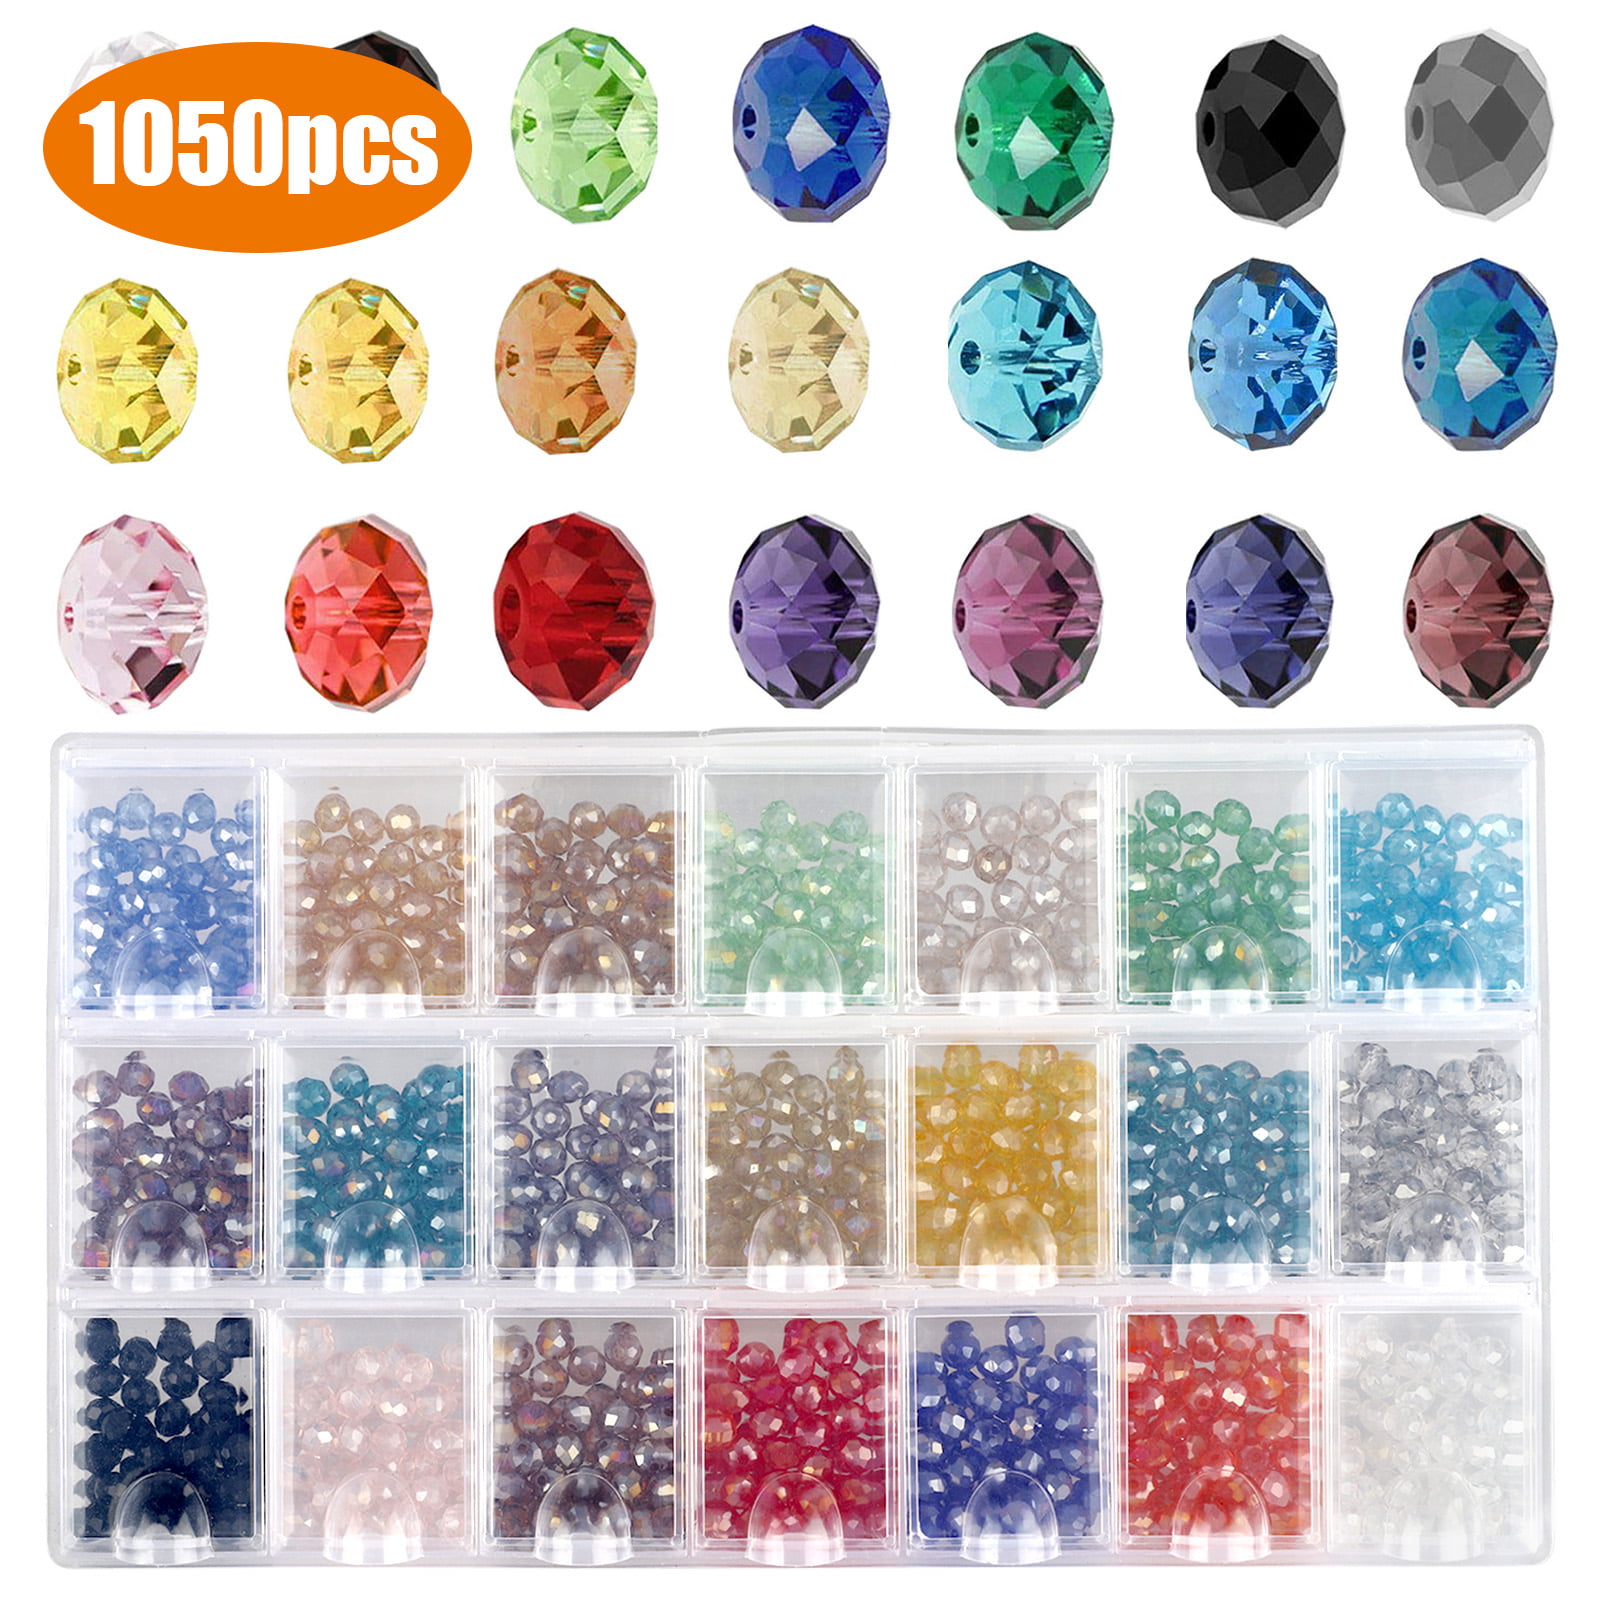 100pcs 6mm Rondelle Faceted Crystal Glass Charms Loose Spacer Beads Findings 